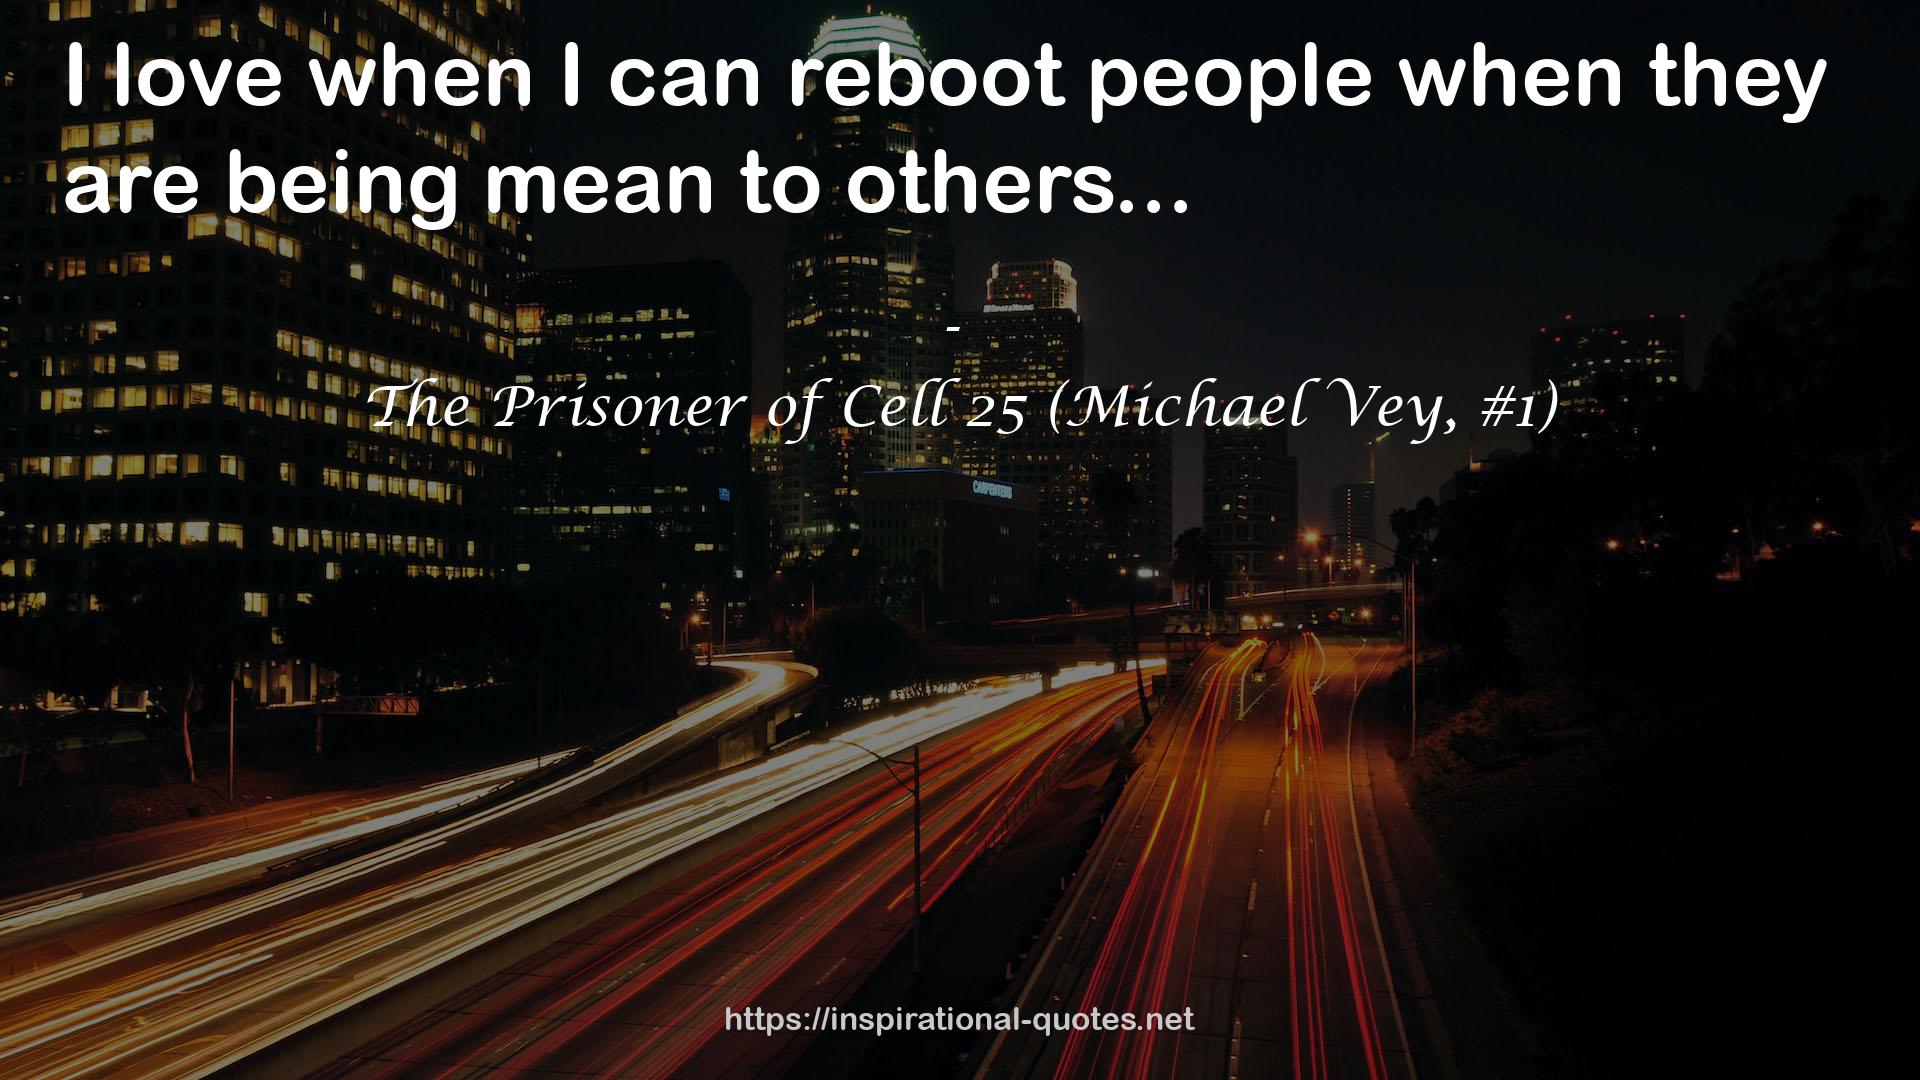 The Prisoner of Cell 25 (Michael Vey, #1) QUOTES